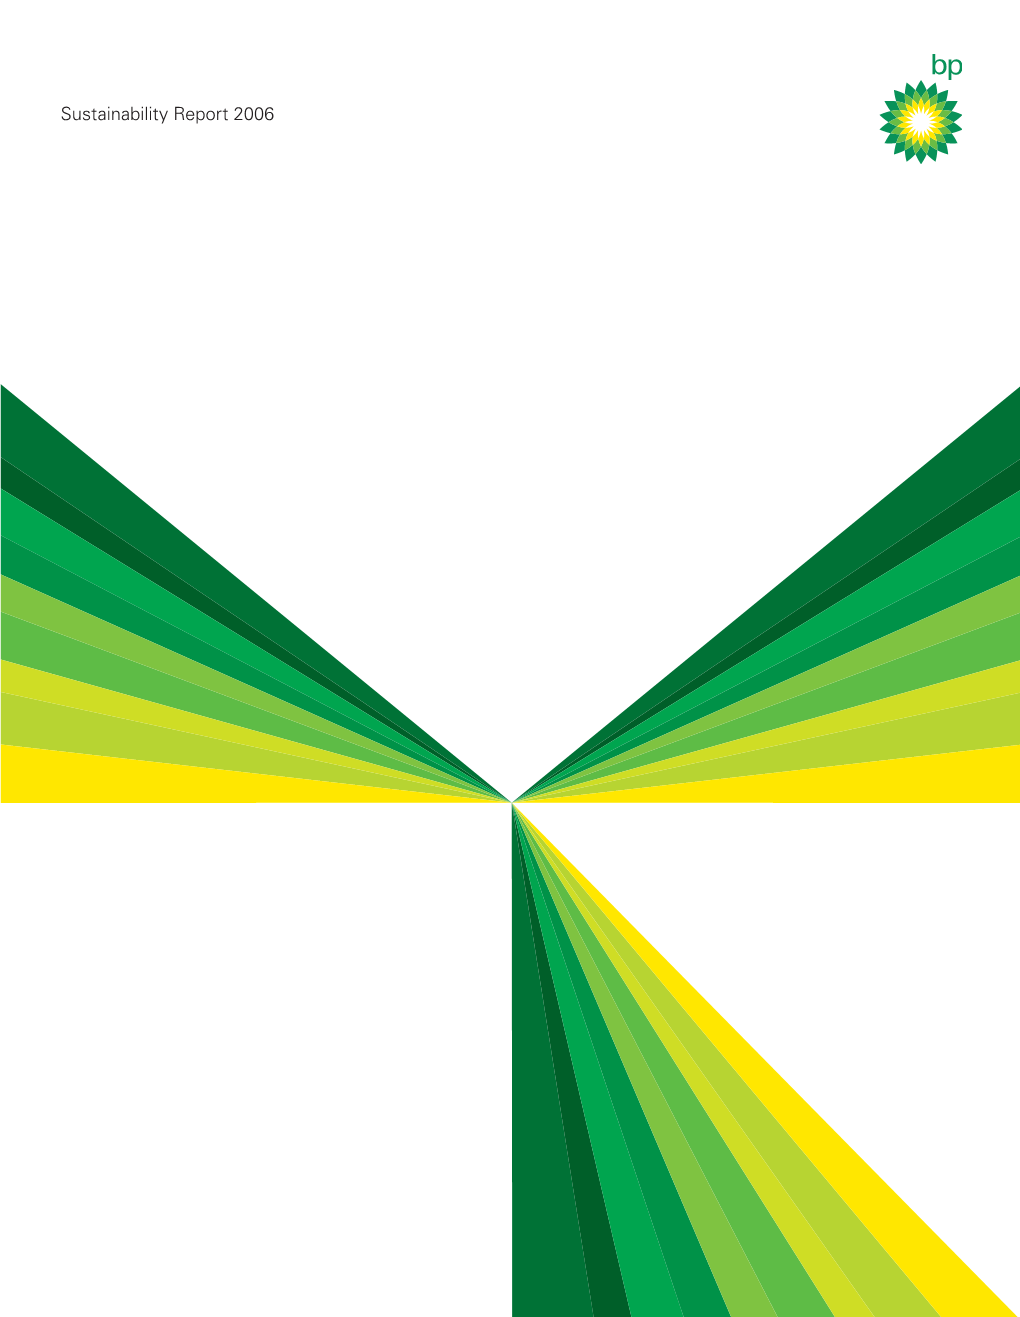 BP Sustainability Report 2006 to Provide Assurance on the Information Reported